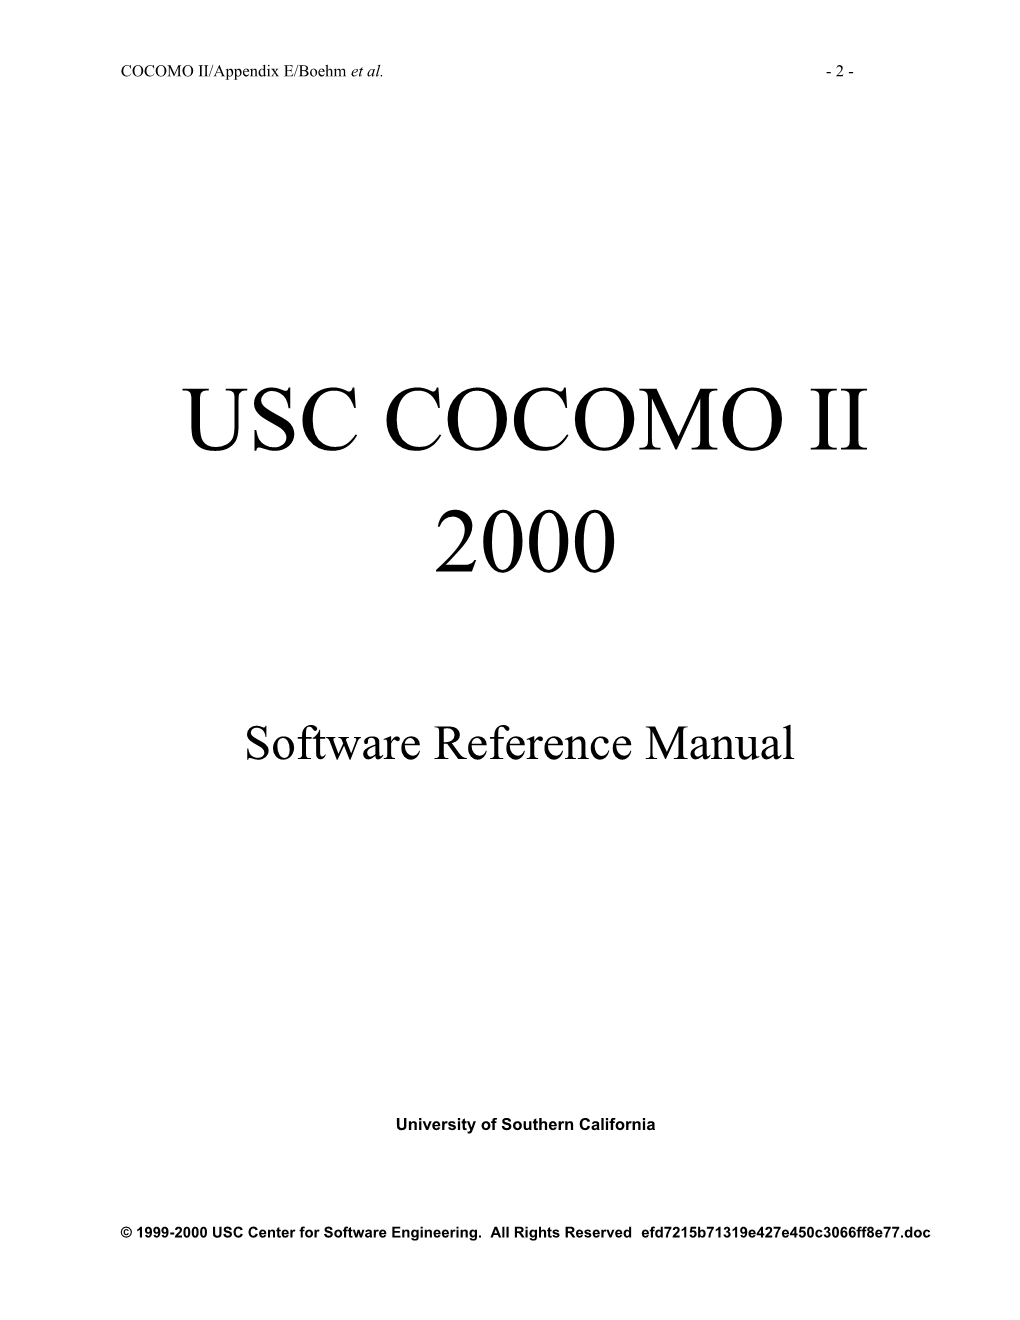 1999-2000 USC Center for Software Engineering. All Rights Reservedq Appendix E 991223 V3+CR